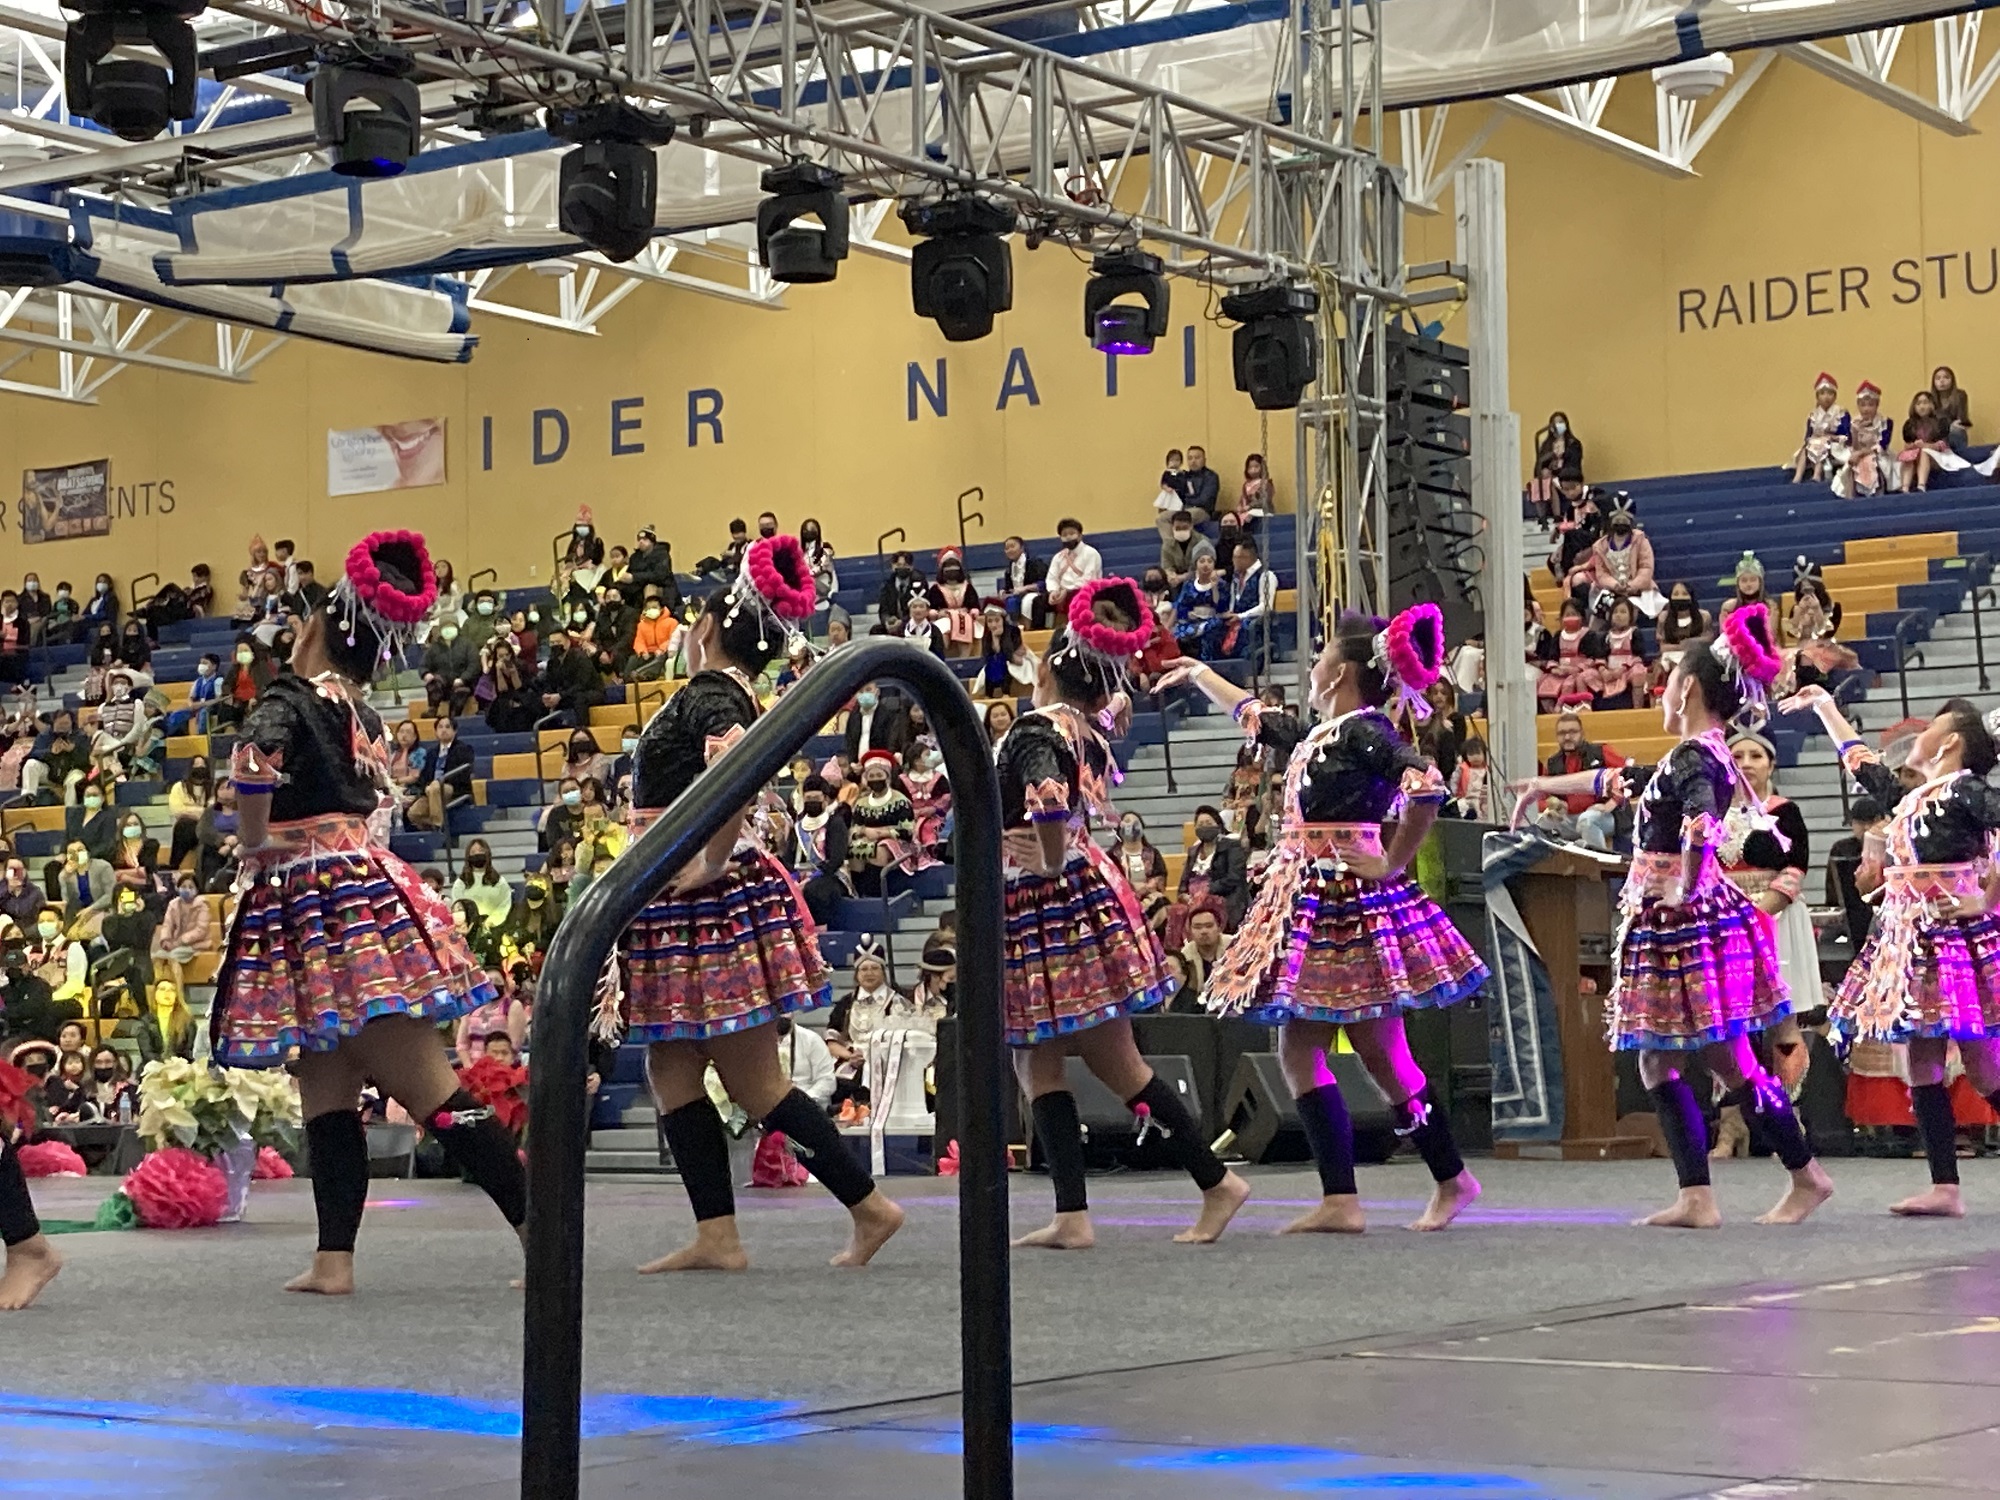 Dancers perform at the Hmong New Year celebration on November 27, 2021. (Photo by Nkaujoua Xiong)